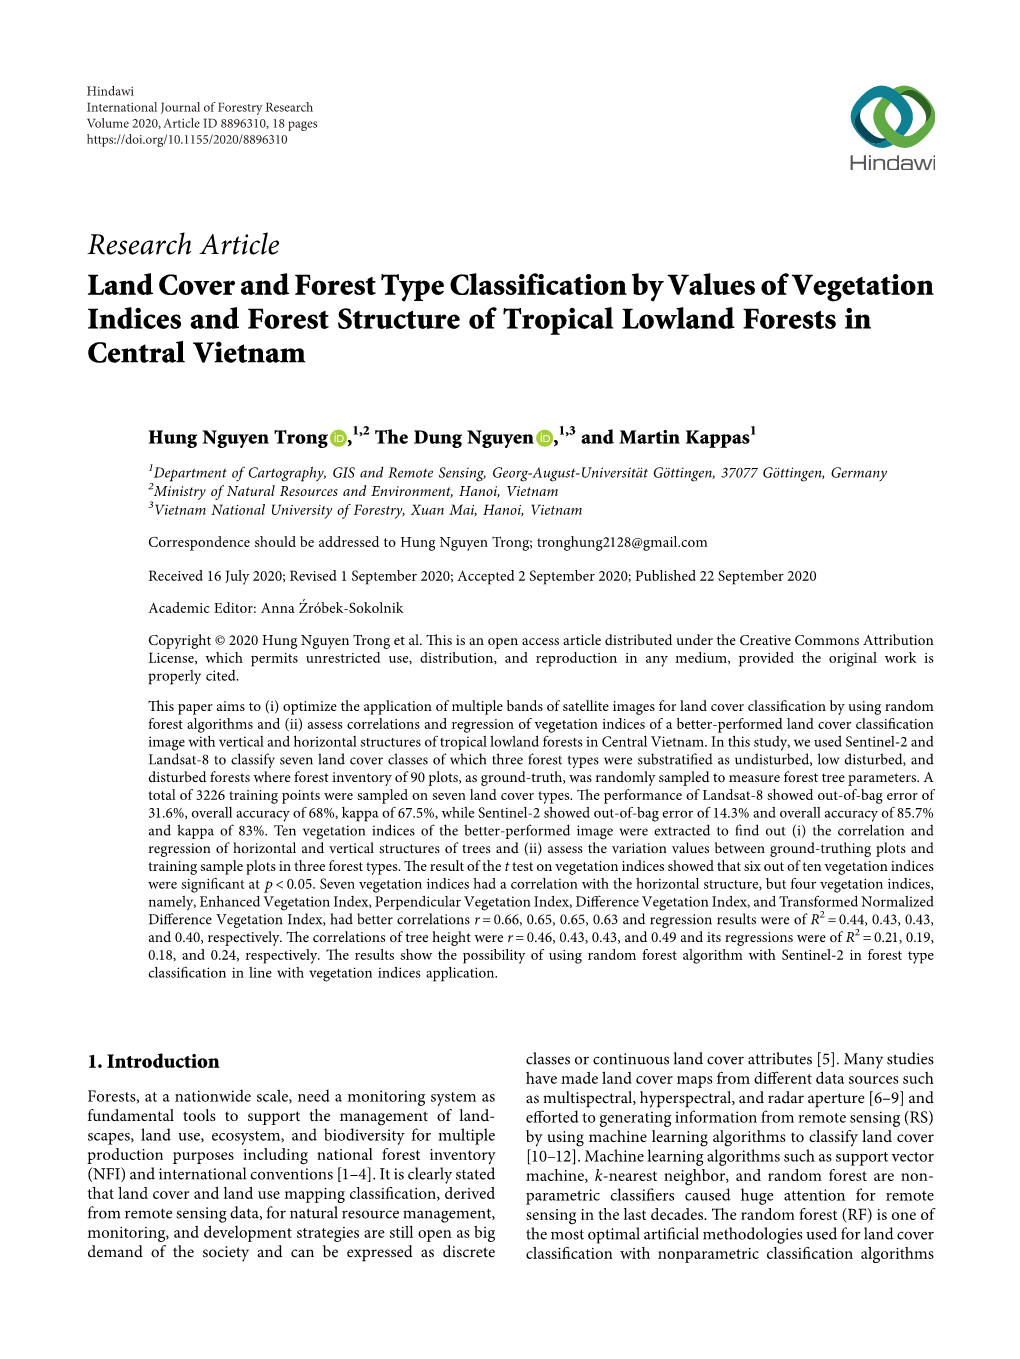 Land Cover and Forest Type Classification by Values of Vegetation Indices and Forest Structure of Tropical Lowland Forests in Central Vietnam